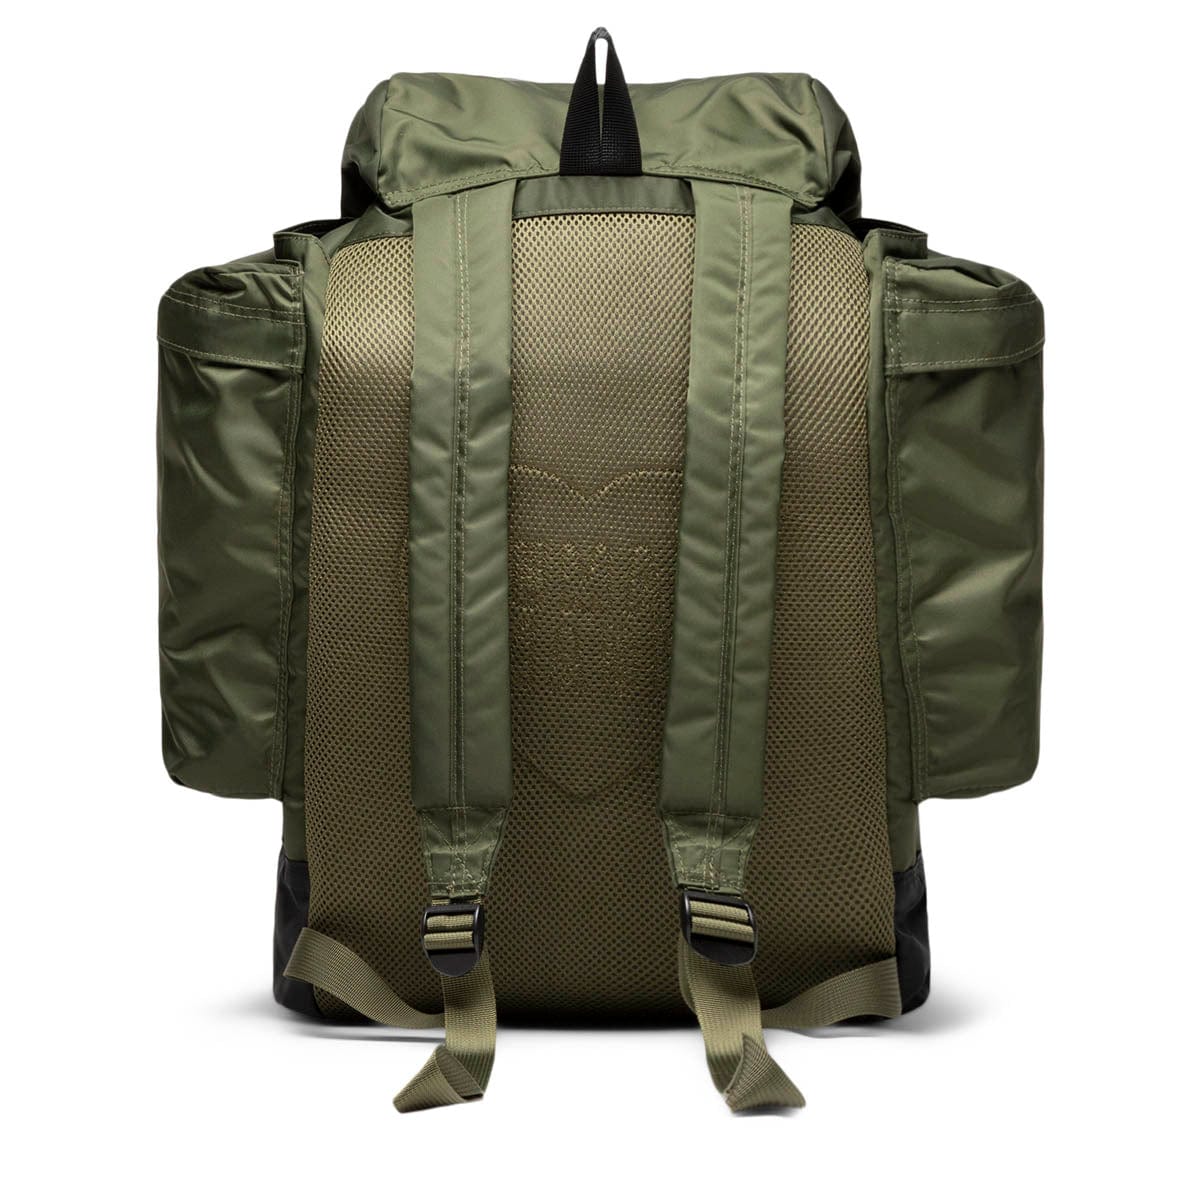 Human Made bags OLIVE DRAB / O/S MILITARY BACK PACK